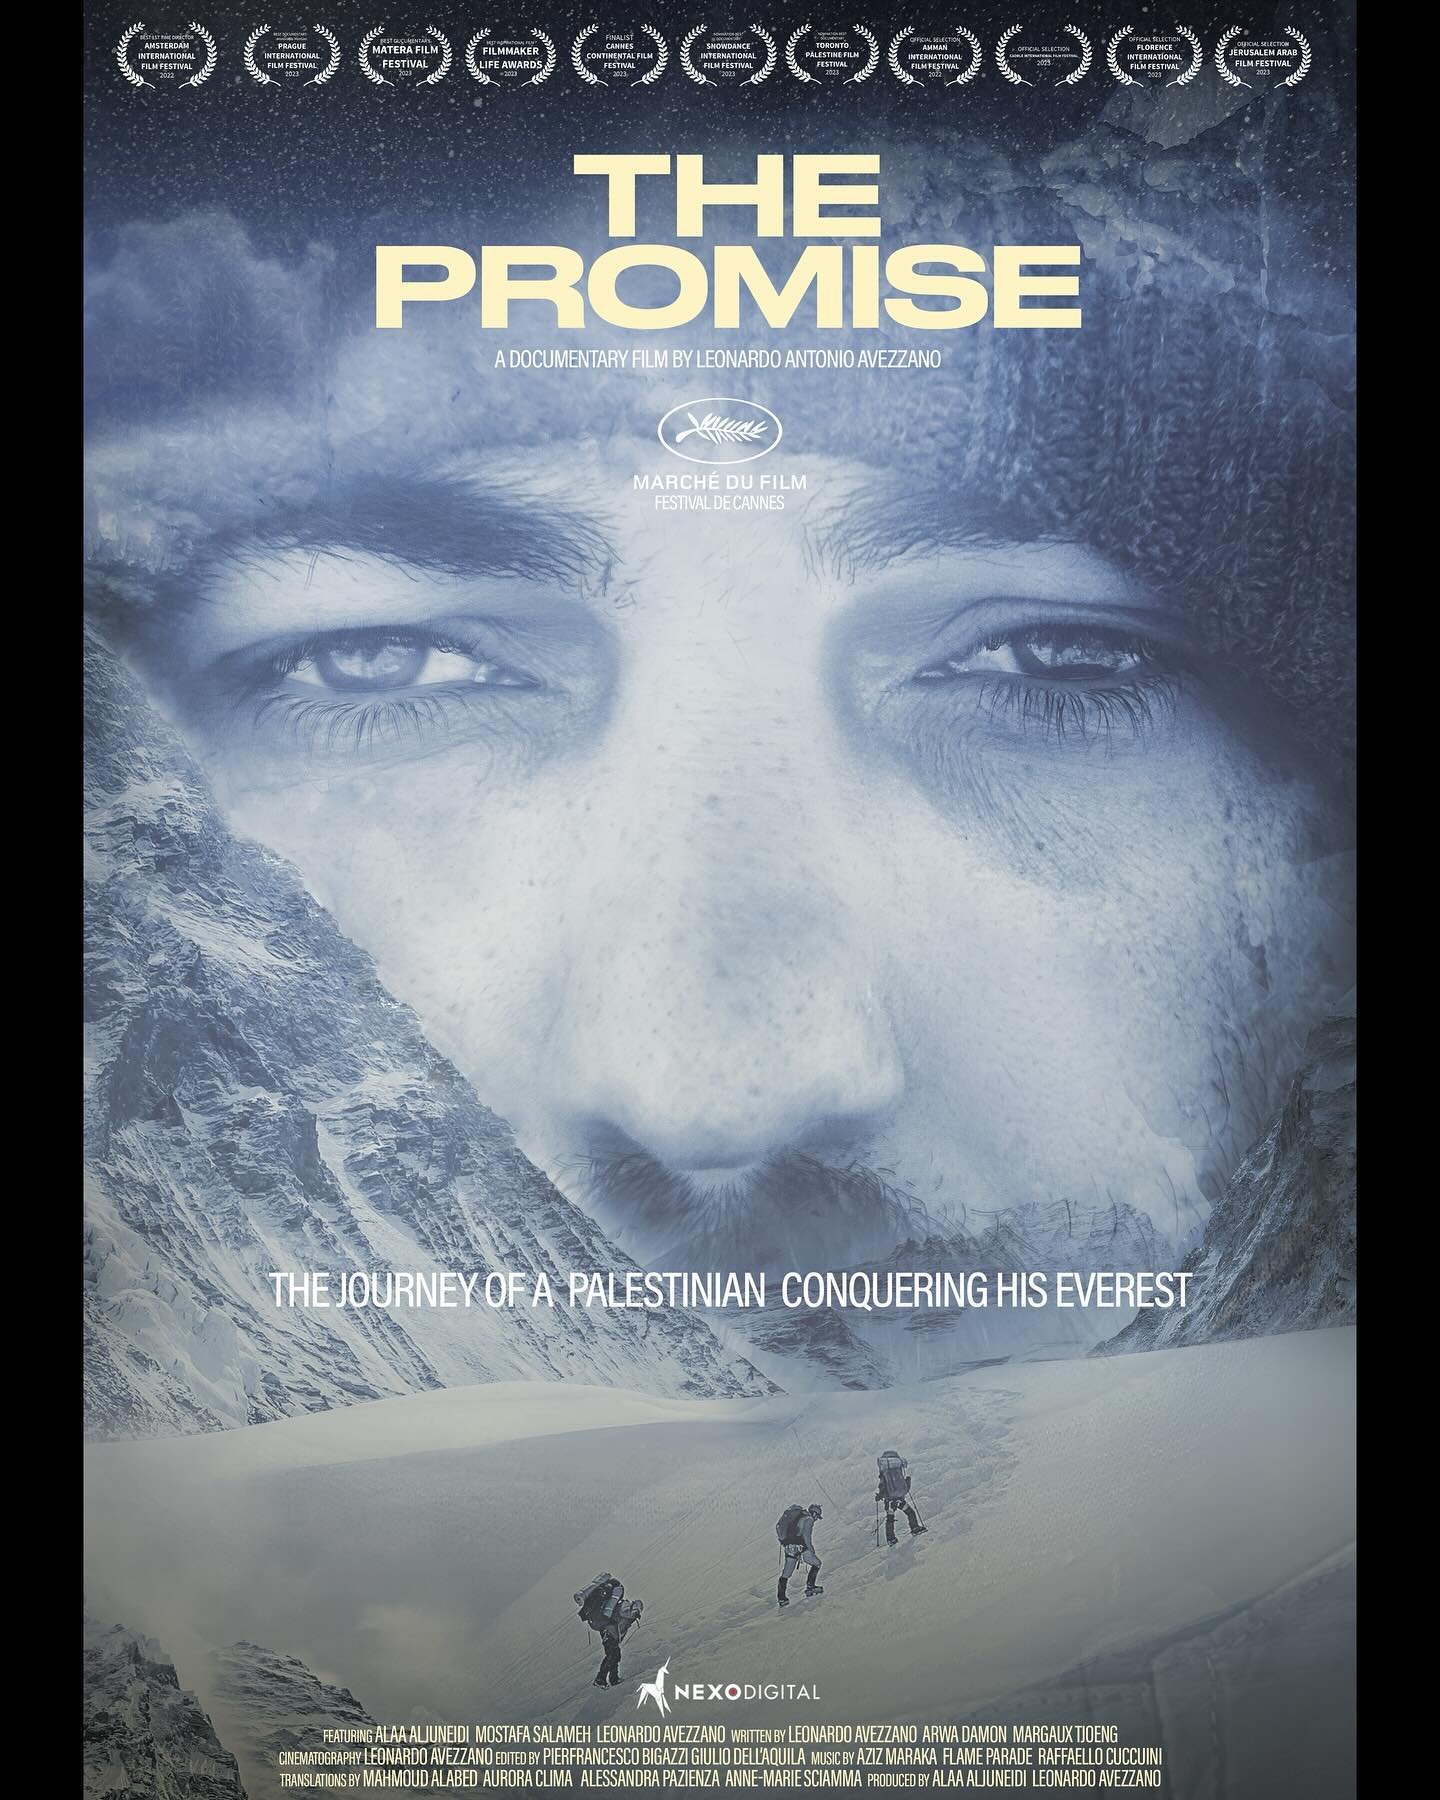 We are thrilled to kick off sales of our documentary film &ldquo;THE PROMISE&rdquo; at March&eacute; du Film - Festival de Cannes, with our distribution partner.

📽️Screening in the &ldquo;ARCADES 3&rdquo; theatre TODAY MAY 20th at 15:30.

(Fun fact